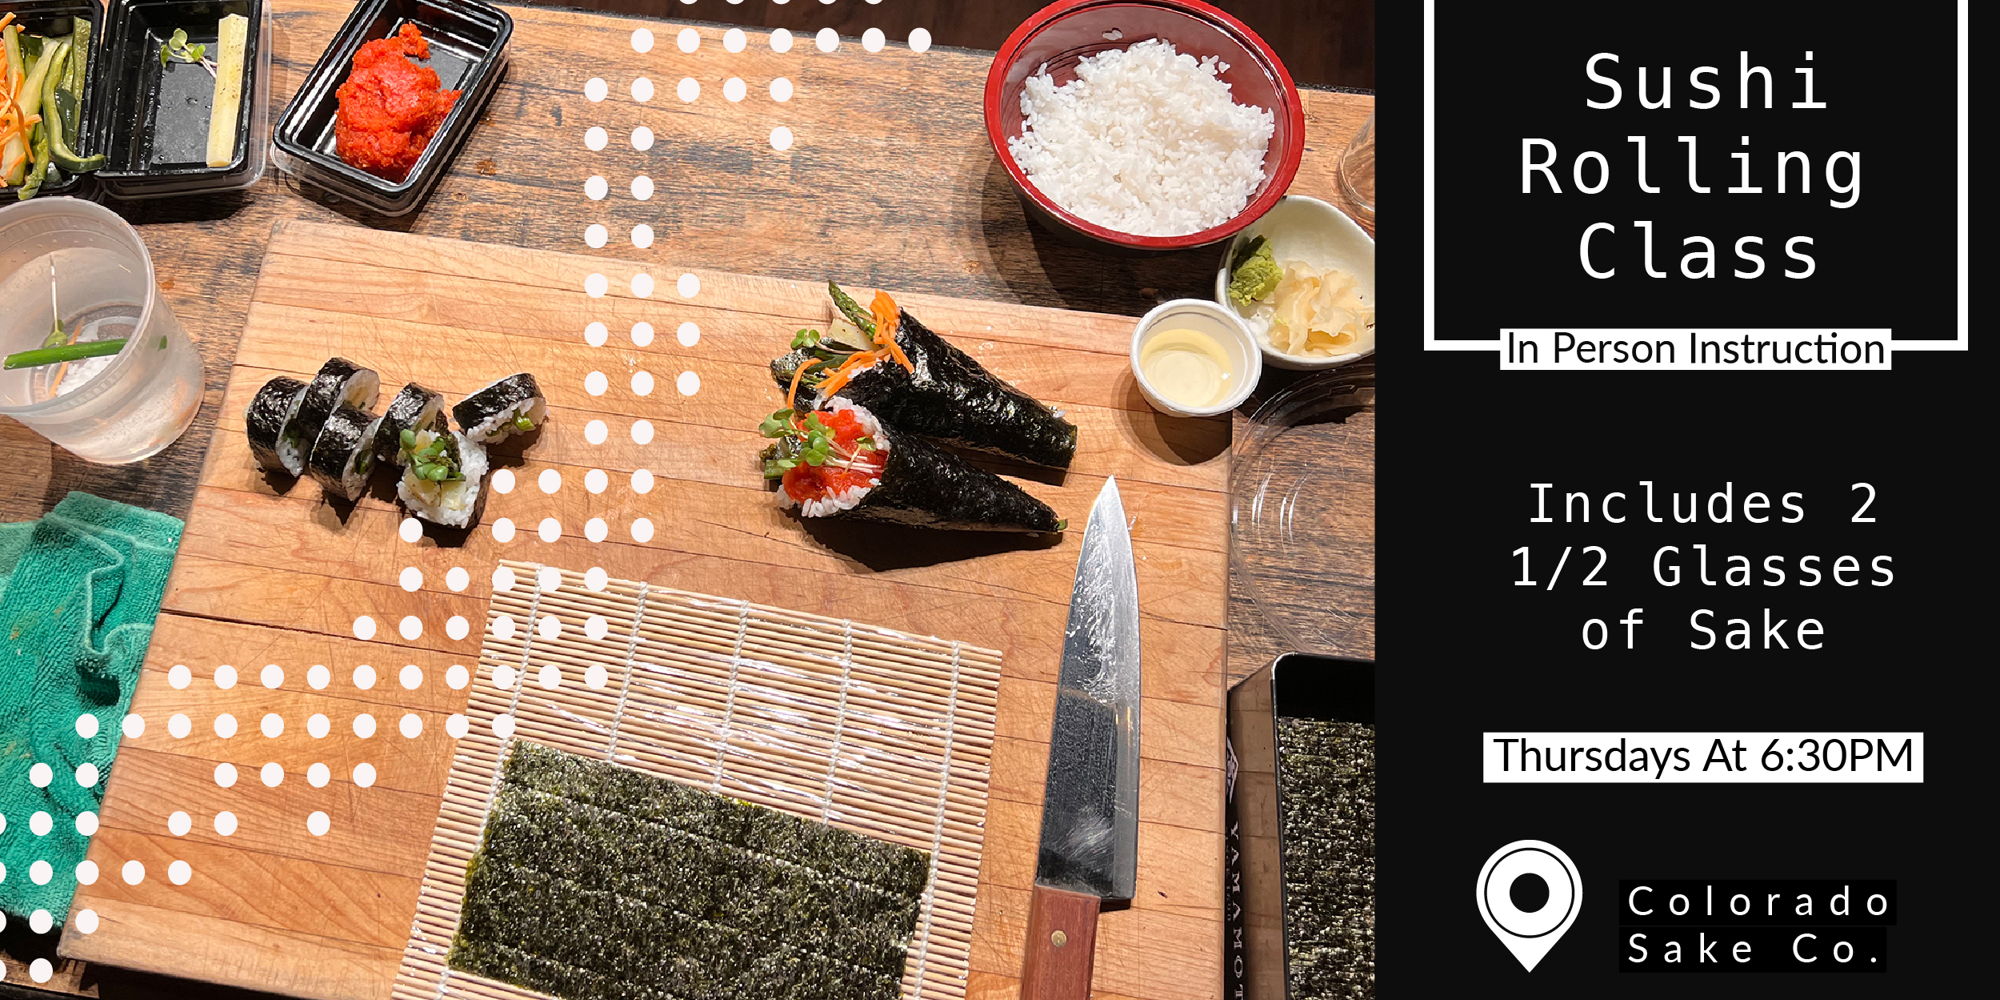 Sushi Rolling Class promotional image